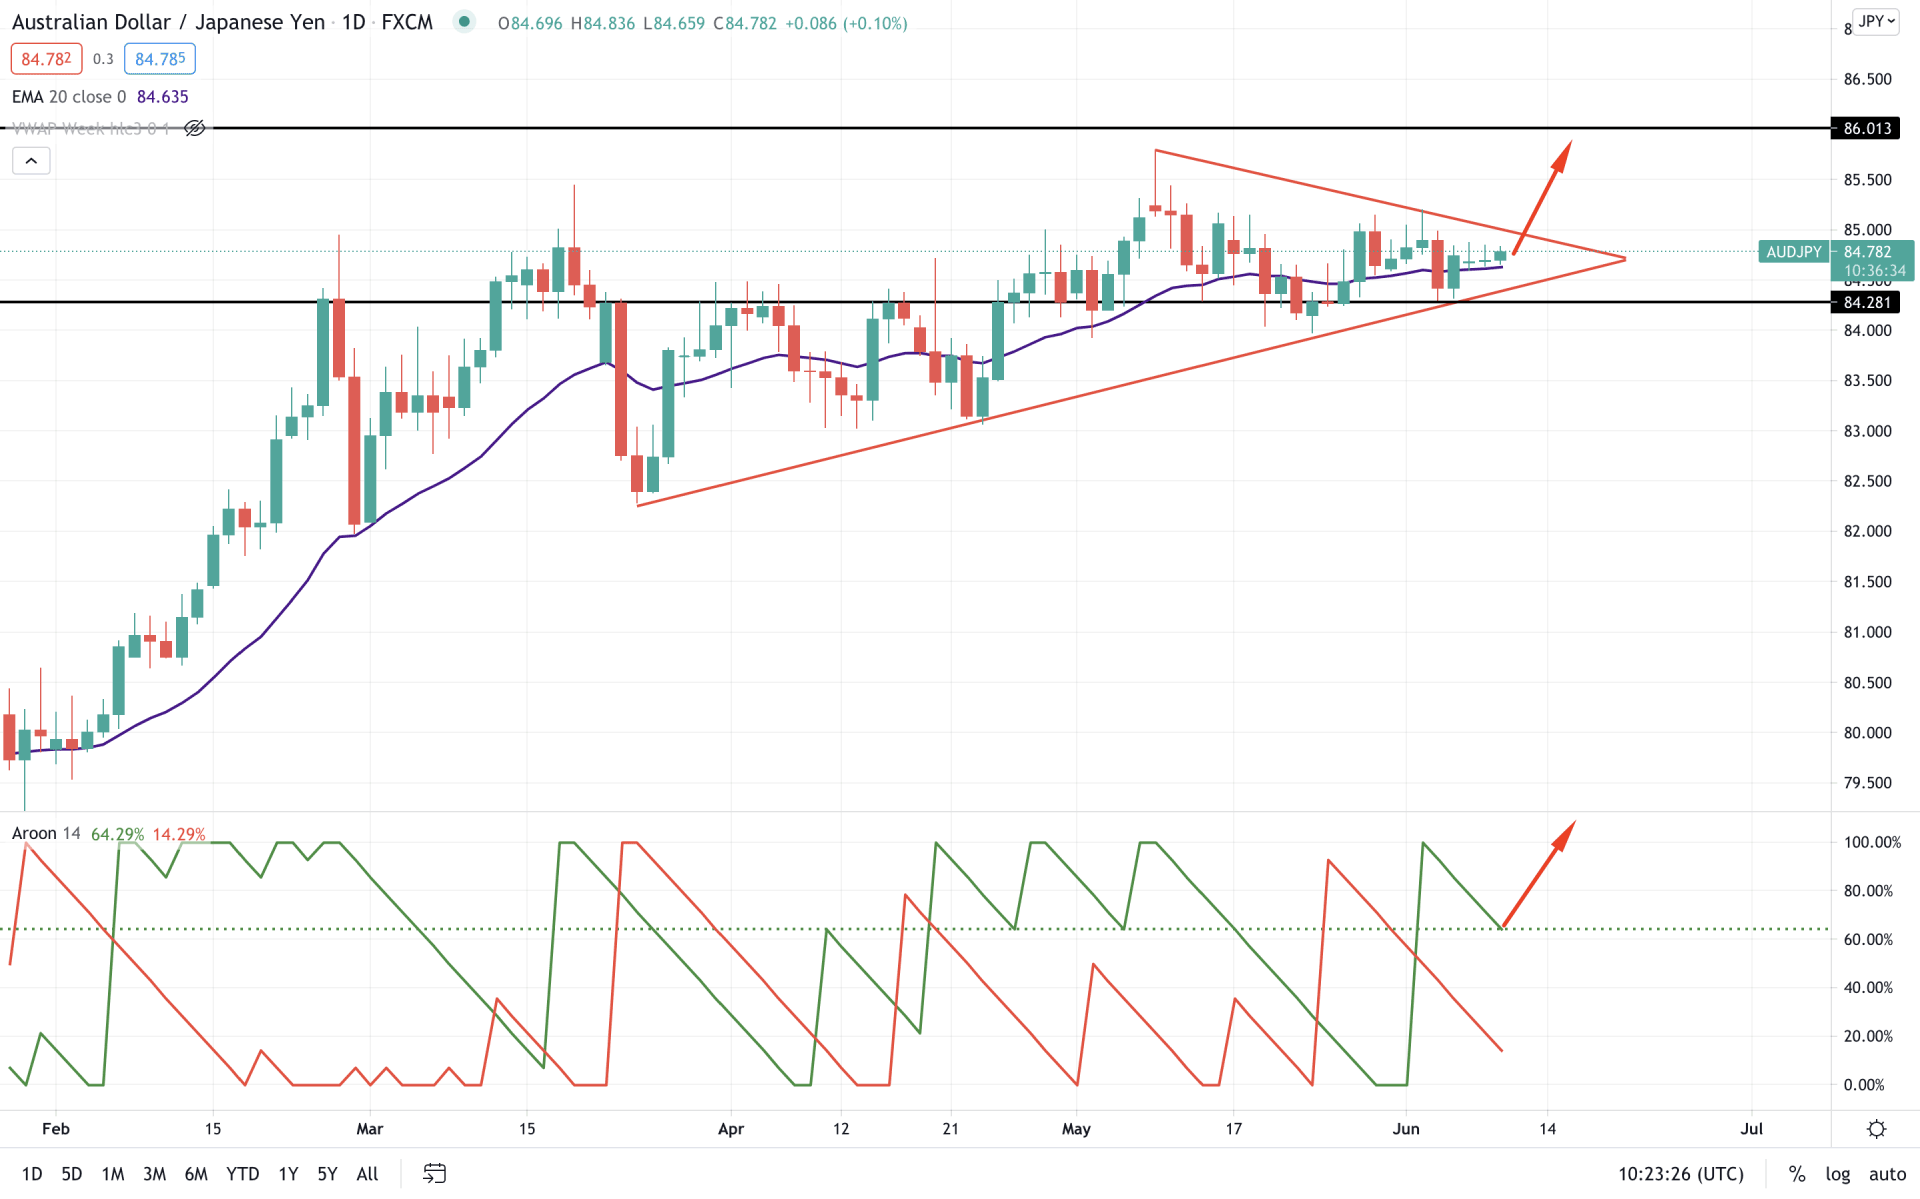 AUDJPY Daily Technical Analysis 9 June 2021